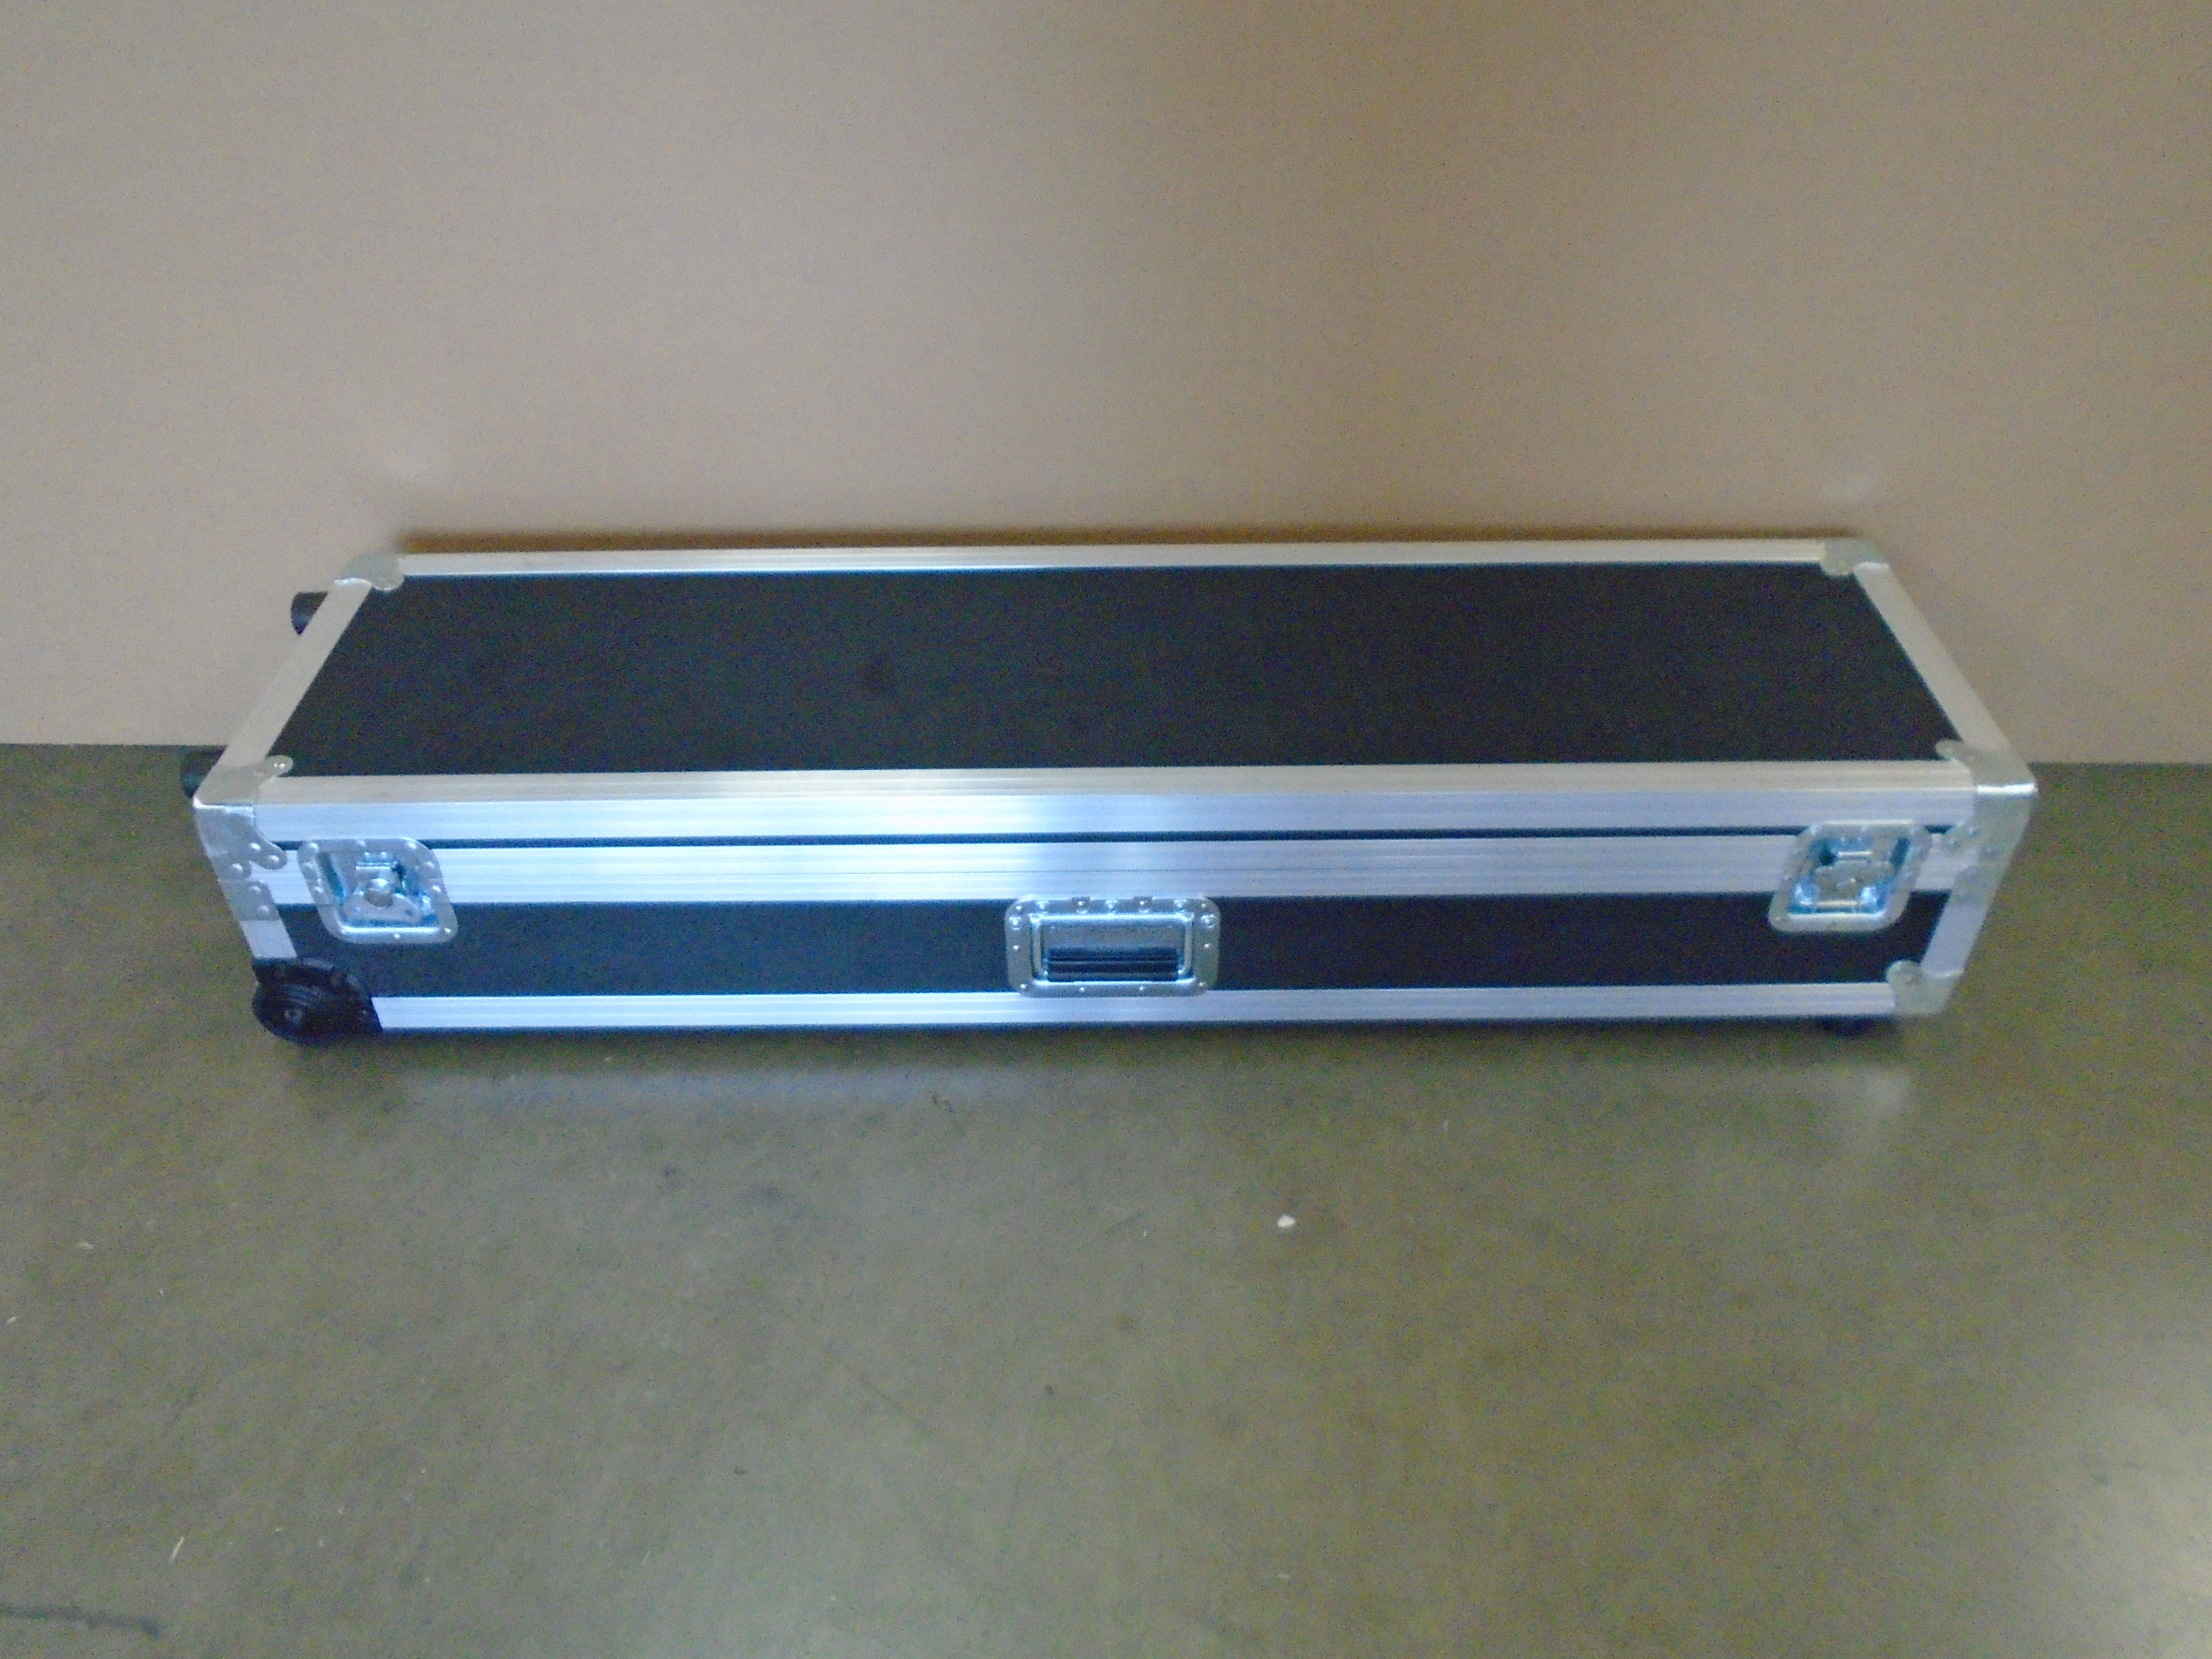 Print # 8058 - Custom Road Case for Leblanc BBb Contrabass Clarinet Model 340 By Nelson Case Corp